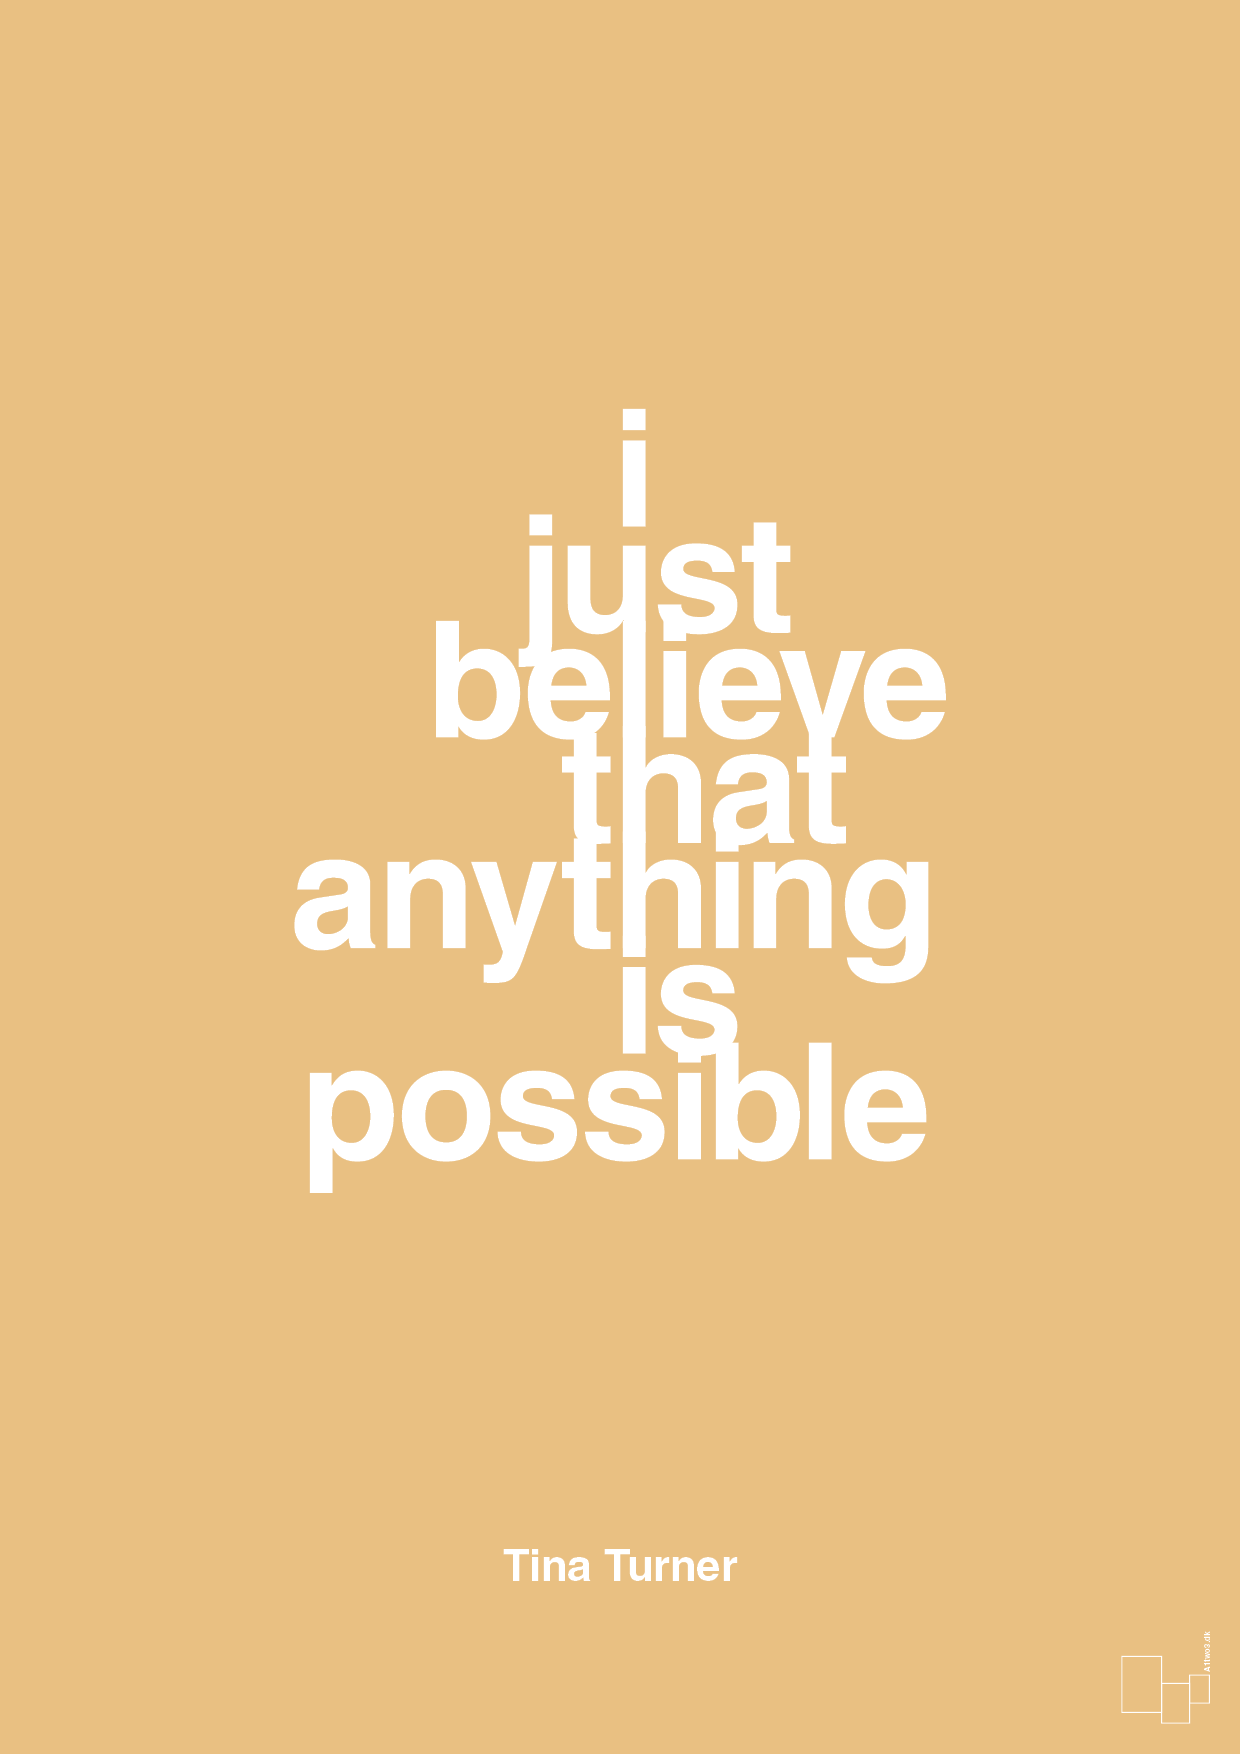 i just believe that anything is possible - Plakat med Citater i Charismatic